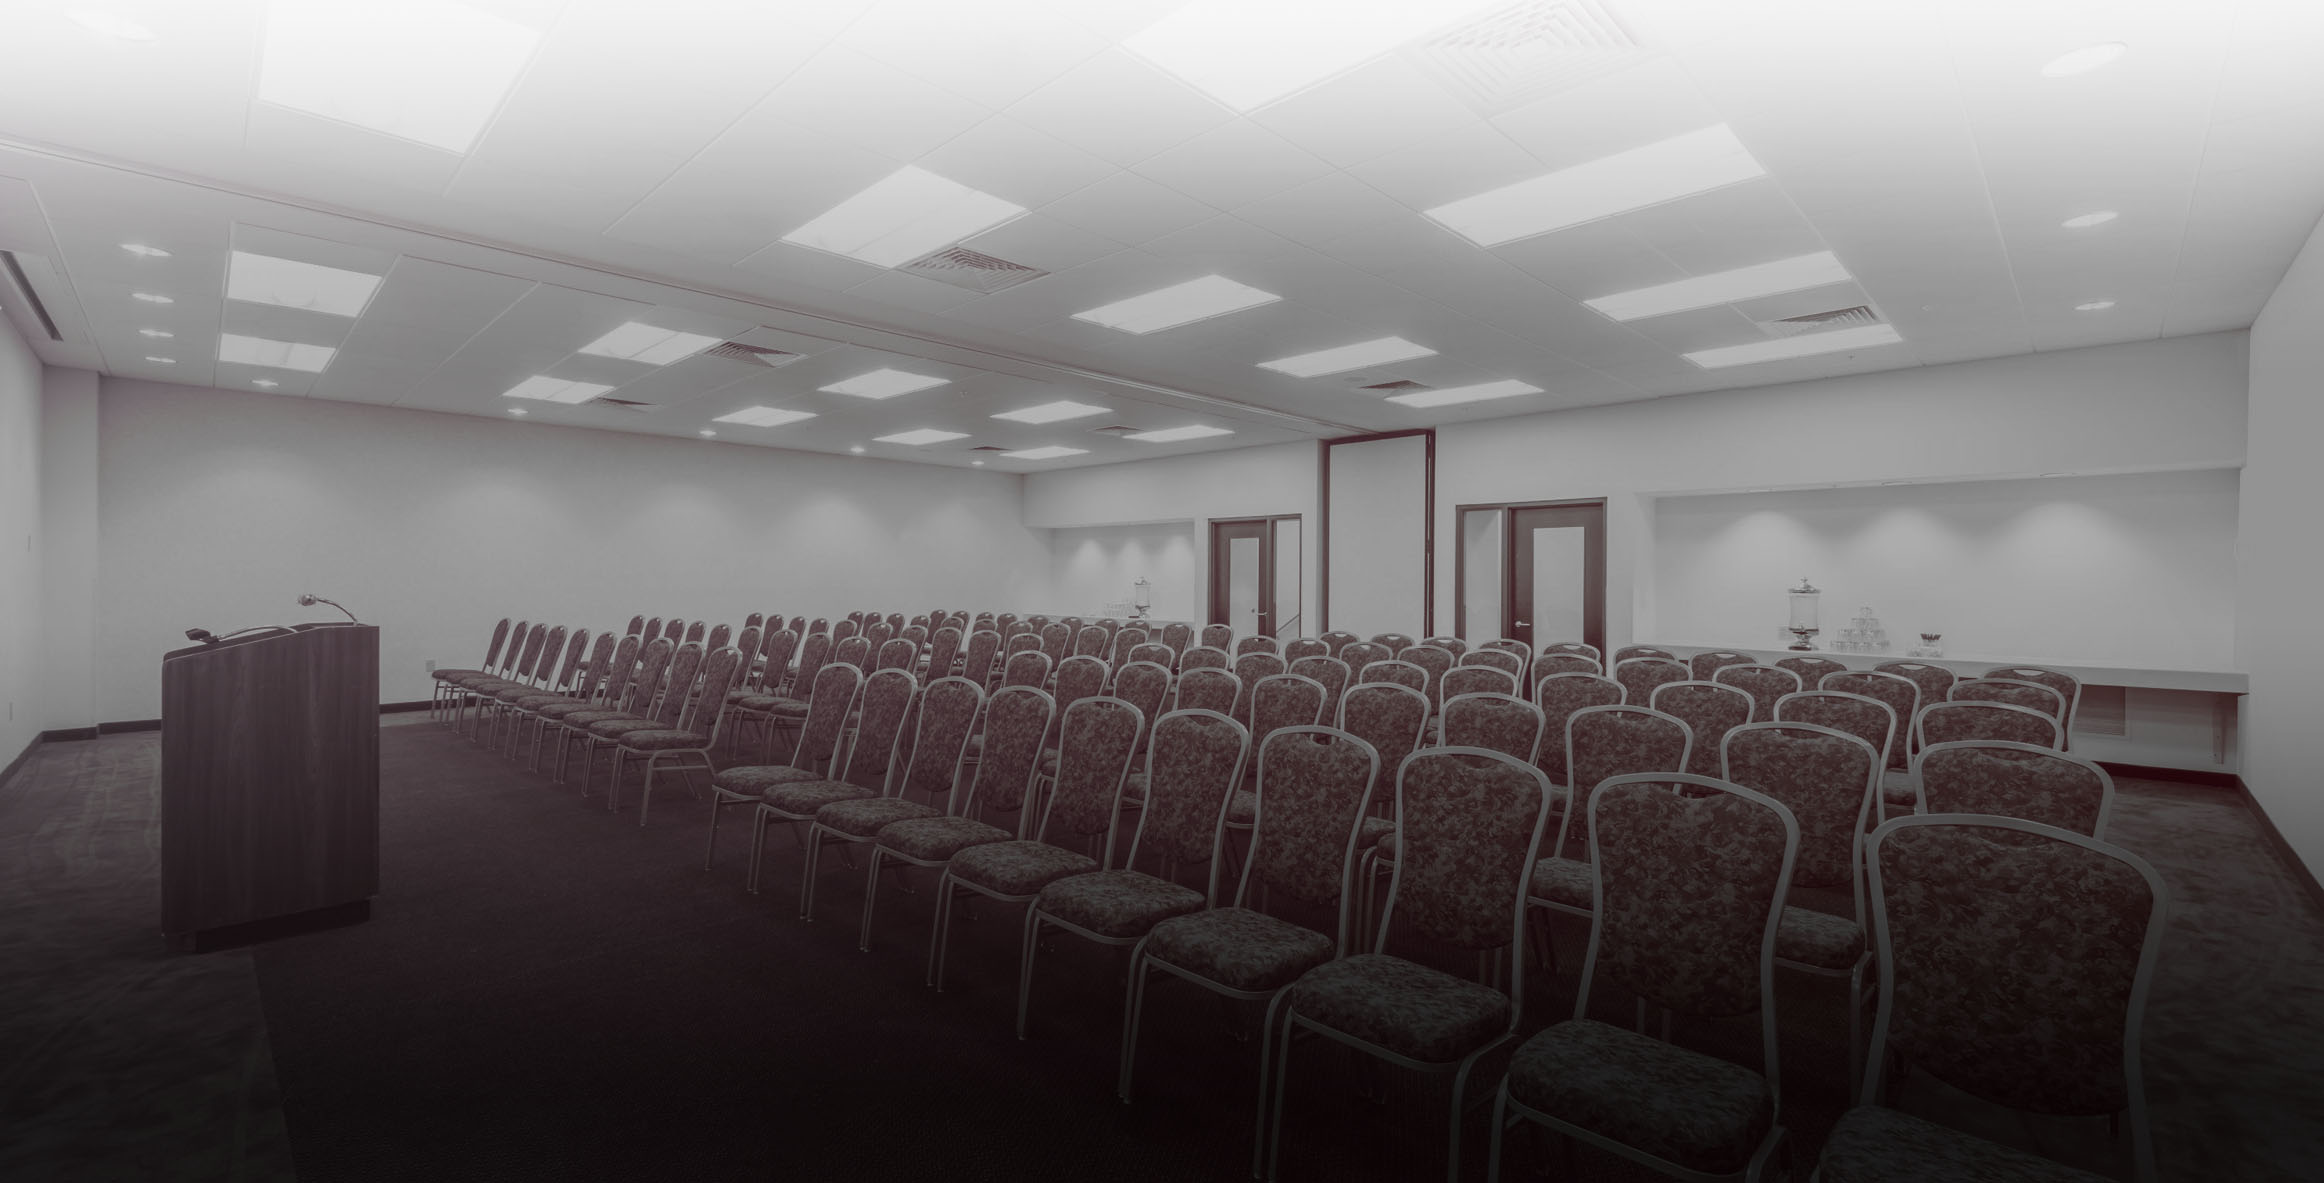 WE OFFER 13 VERSATILE MEETING CONFERENCE AND EVENT ROOMS IN THE HEART OF STATE COLLEGE, PENNSYLVANIA